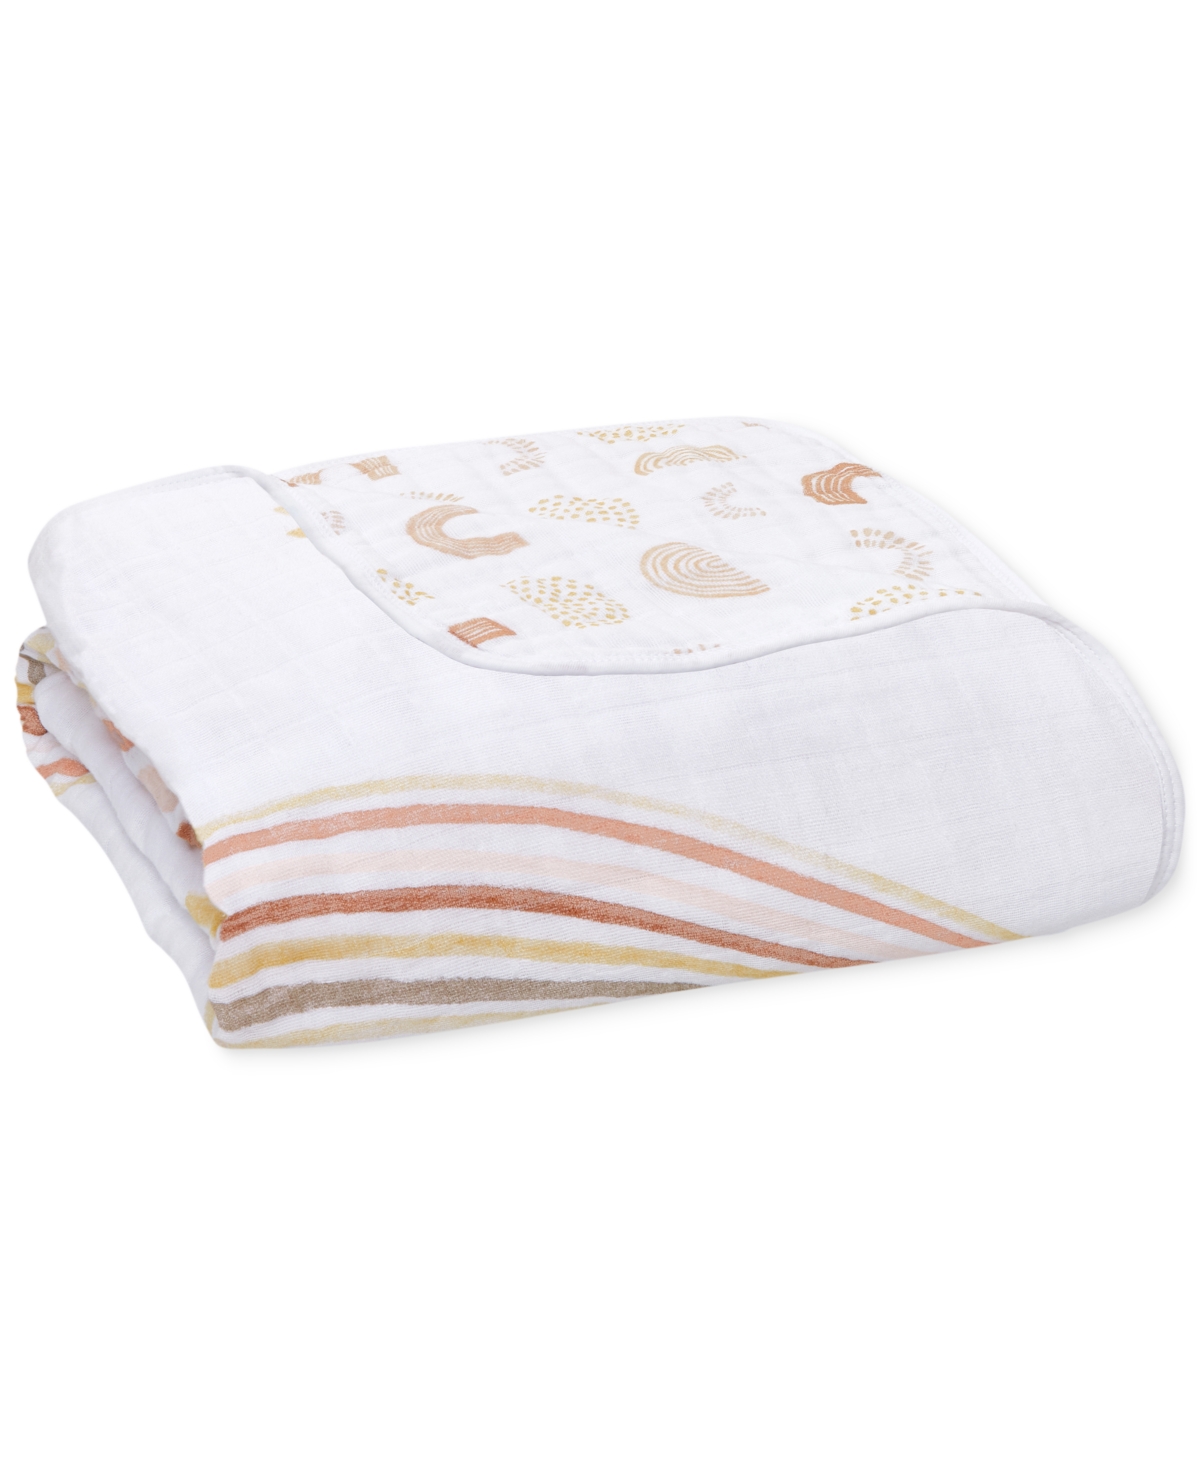 Aden By Aden + Anais Baby Girls Keep Rising Dream Blanket In Tan